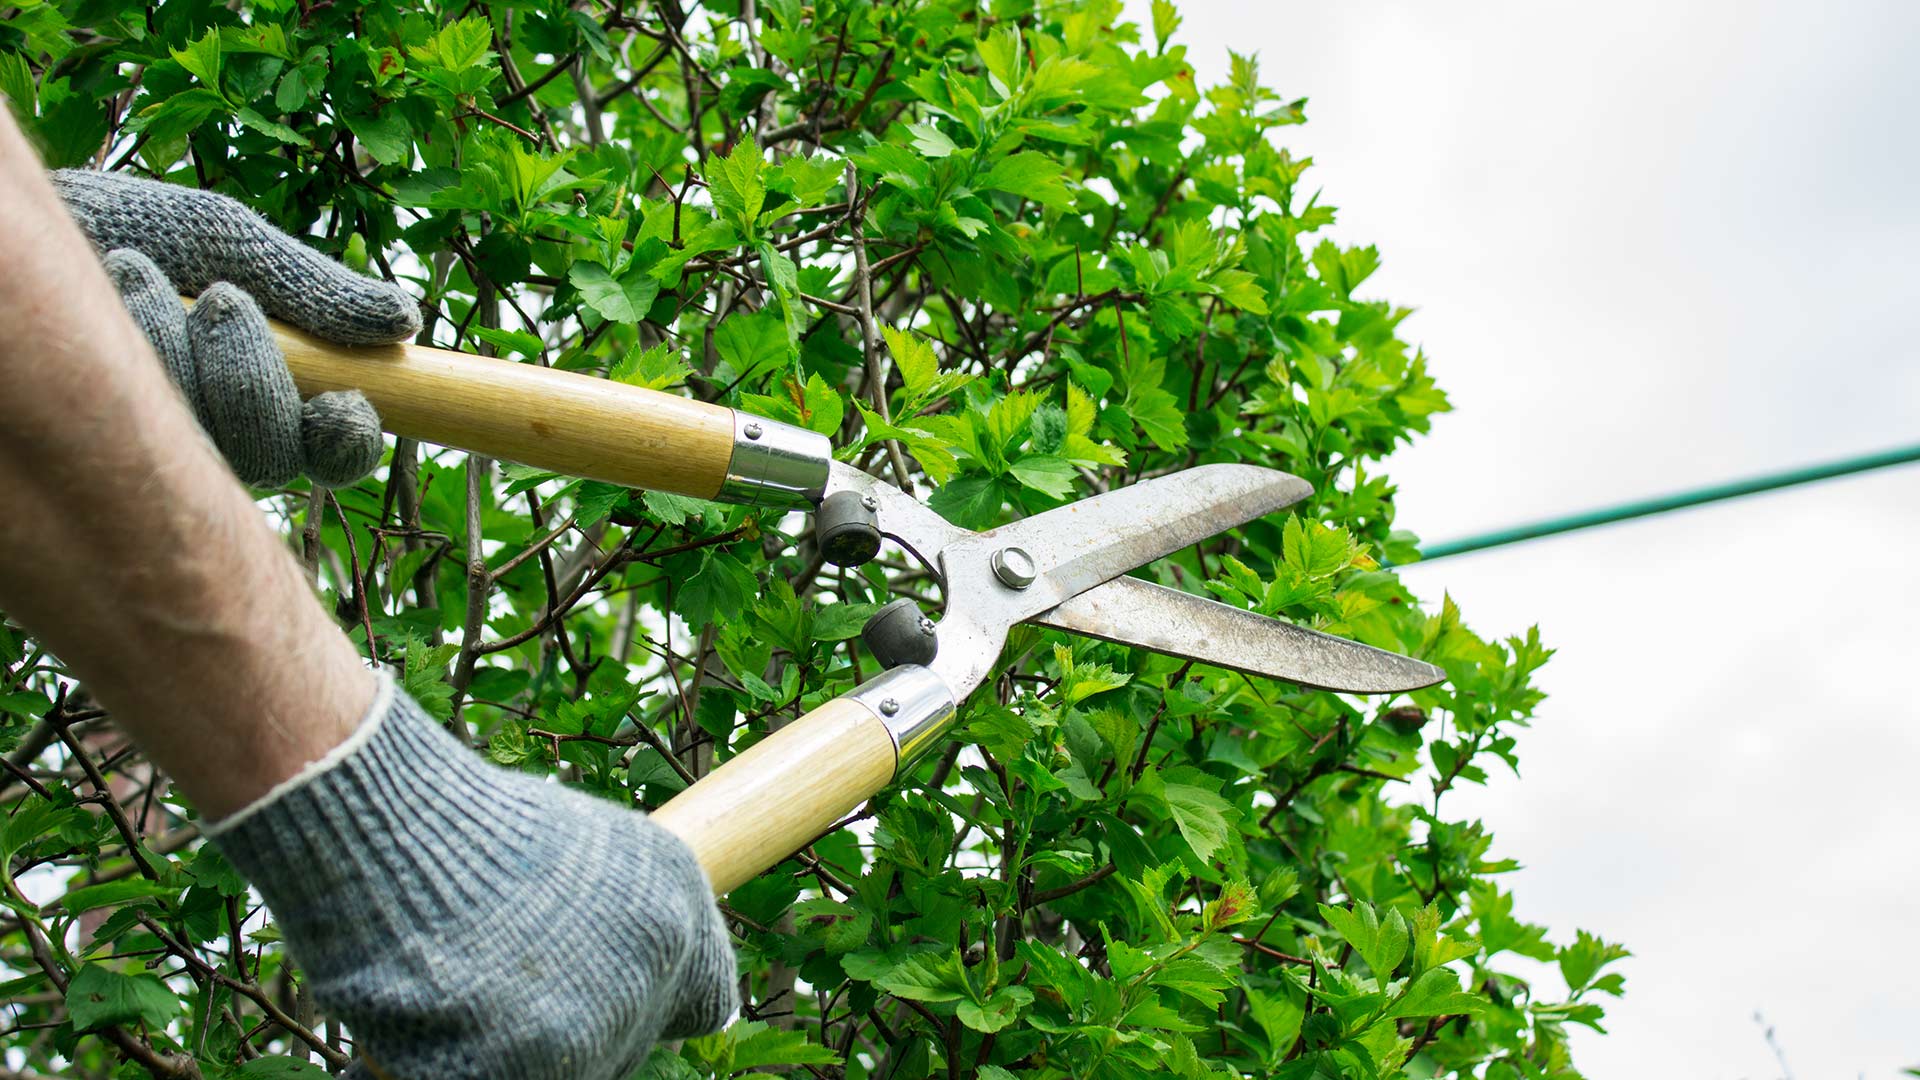 Professional using hedge clippers on a shrub in Exton, PA.